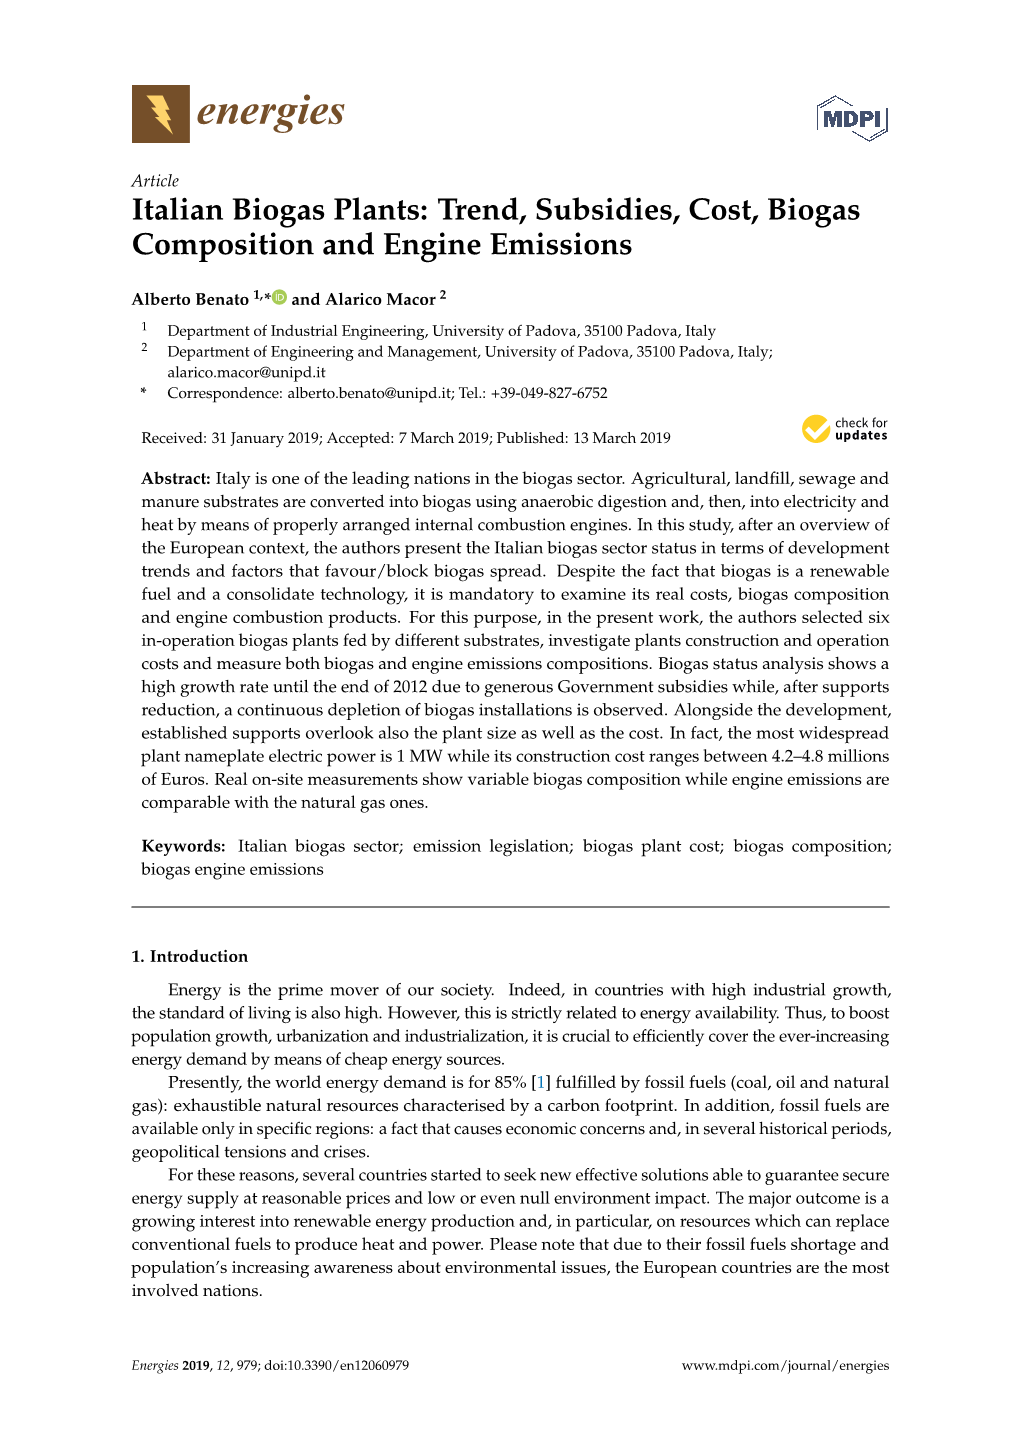 Italian Biogas Plants: Trend, Subsidies, Cost, Biogas Composition and Engine Emissions